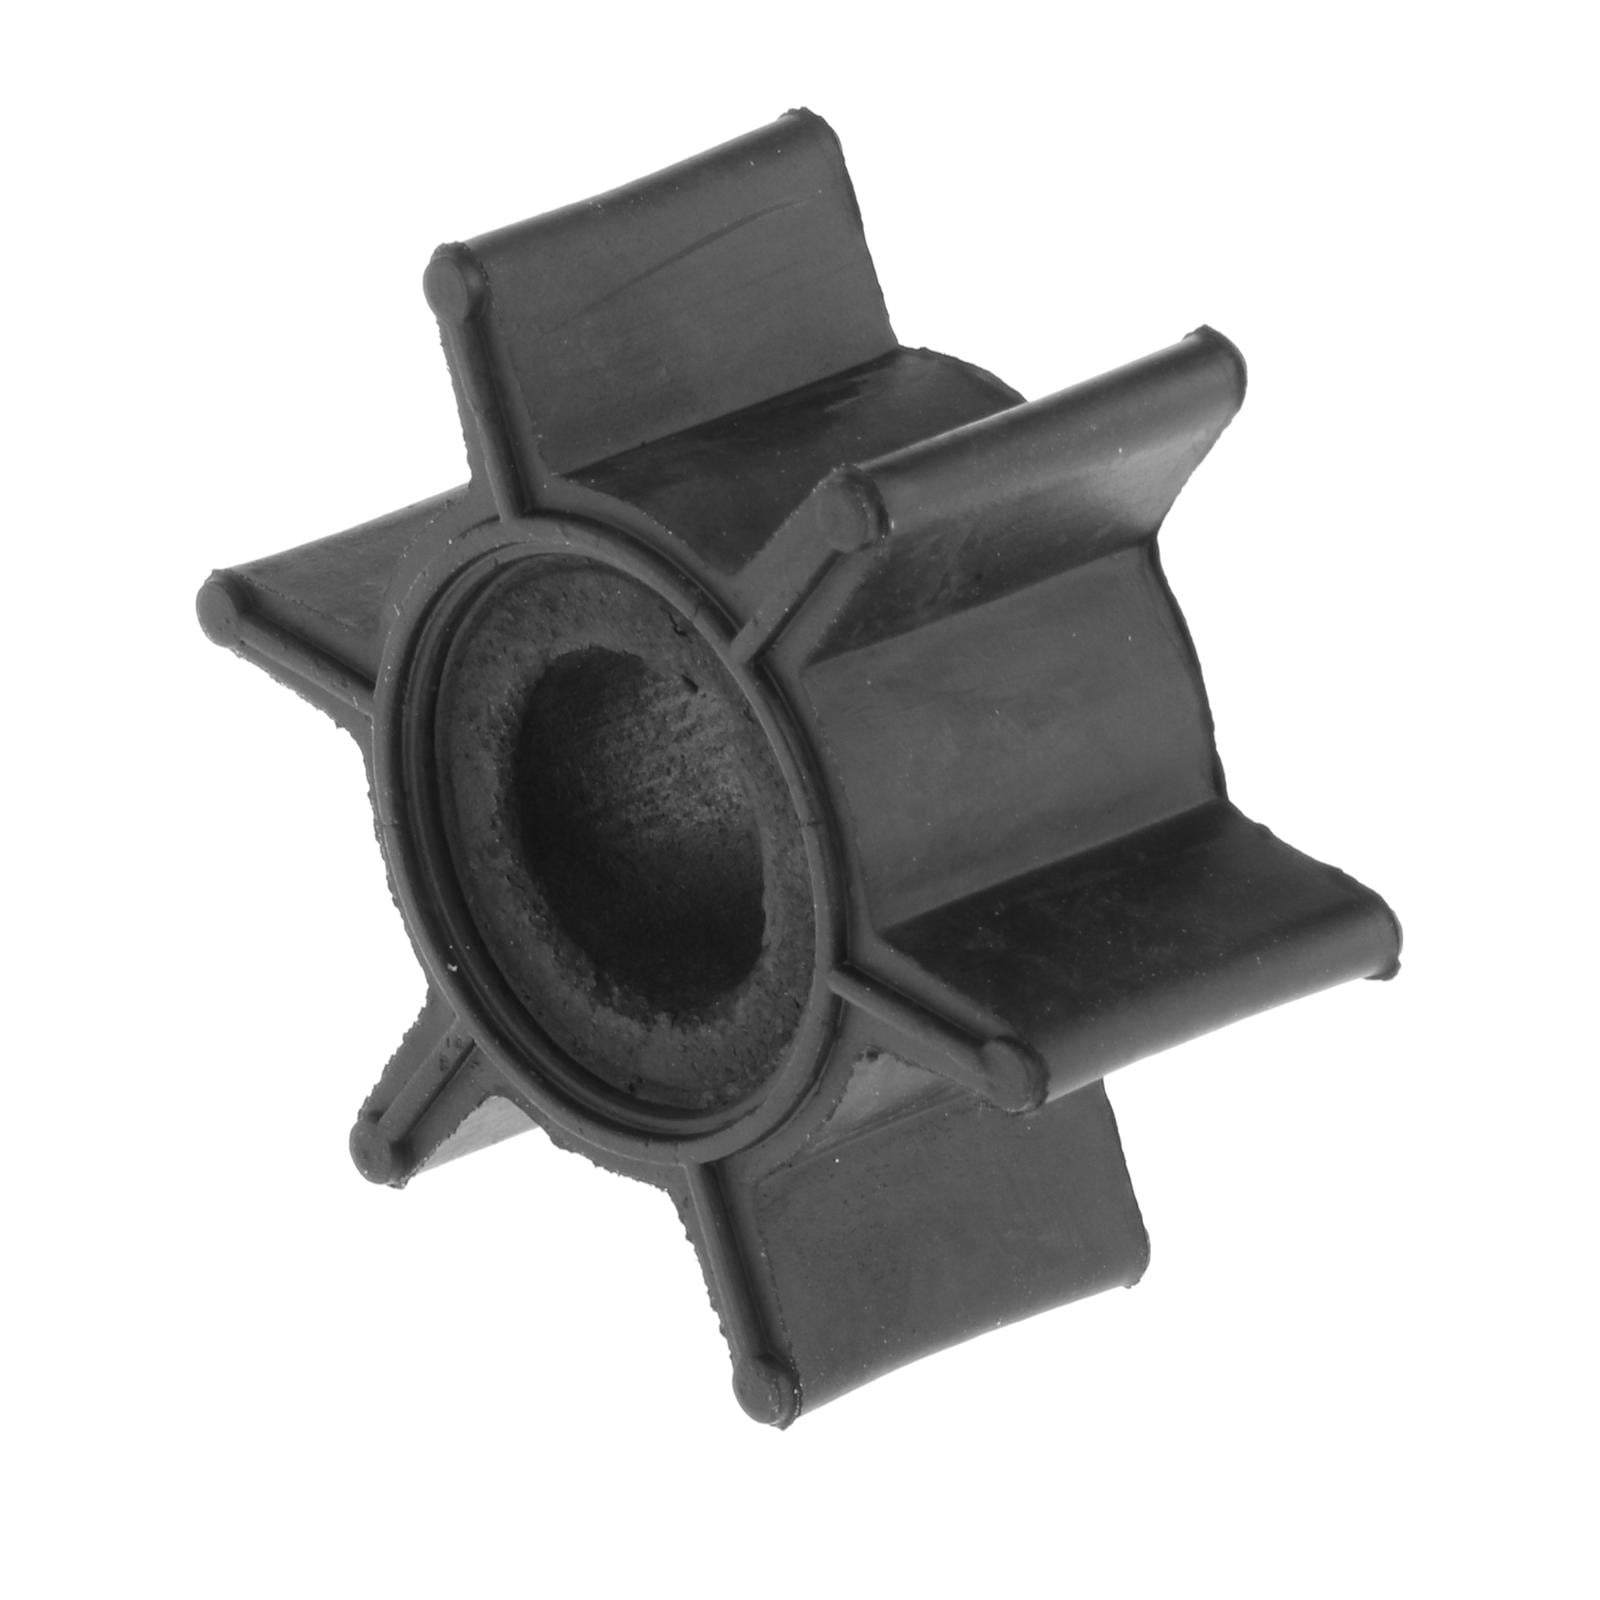 WATER PUMP IMPELLER FOR TOHATSU OUTBOARD ENGINE 2.5 HP 3.5 HP 4 HP  5 HP 2 TROKE 